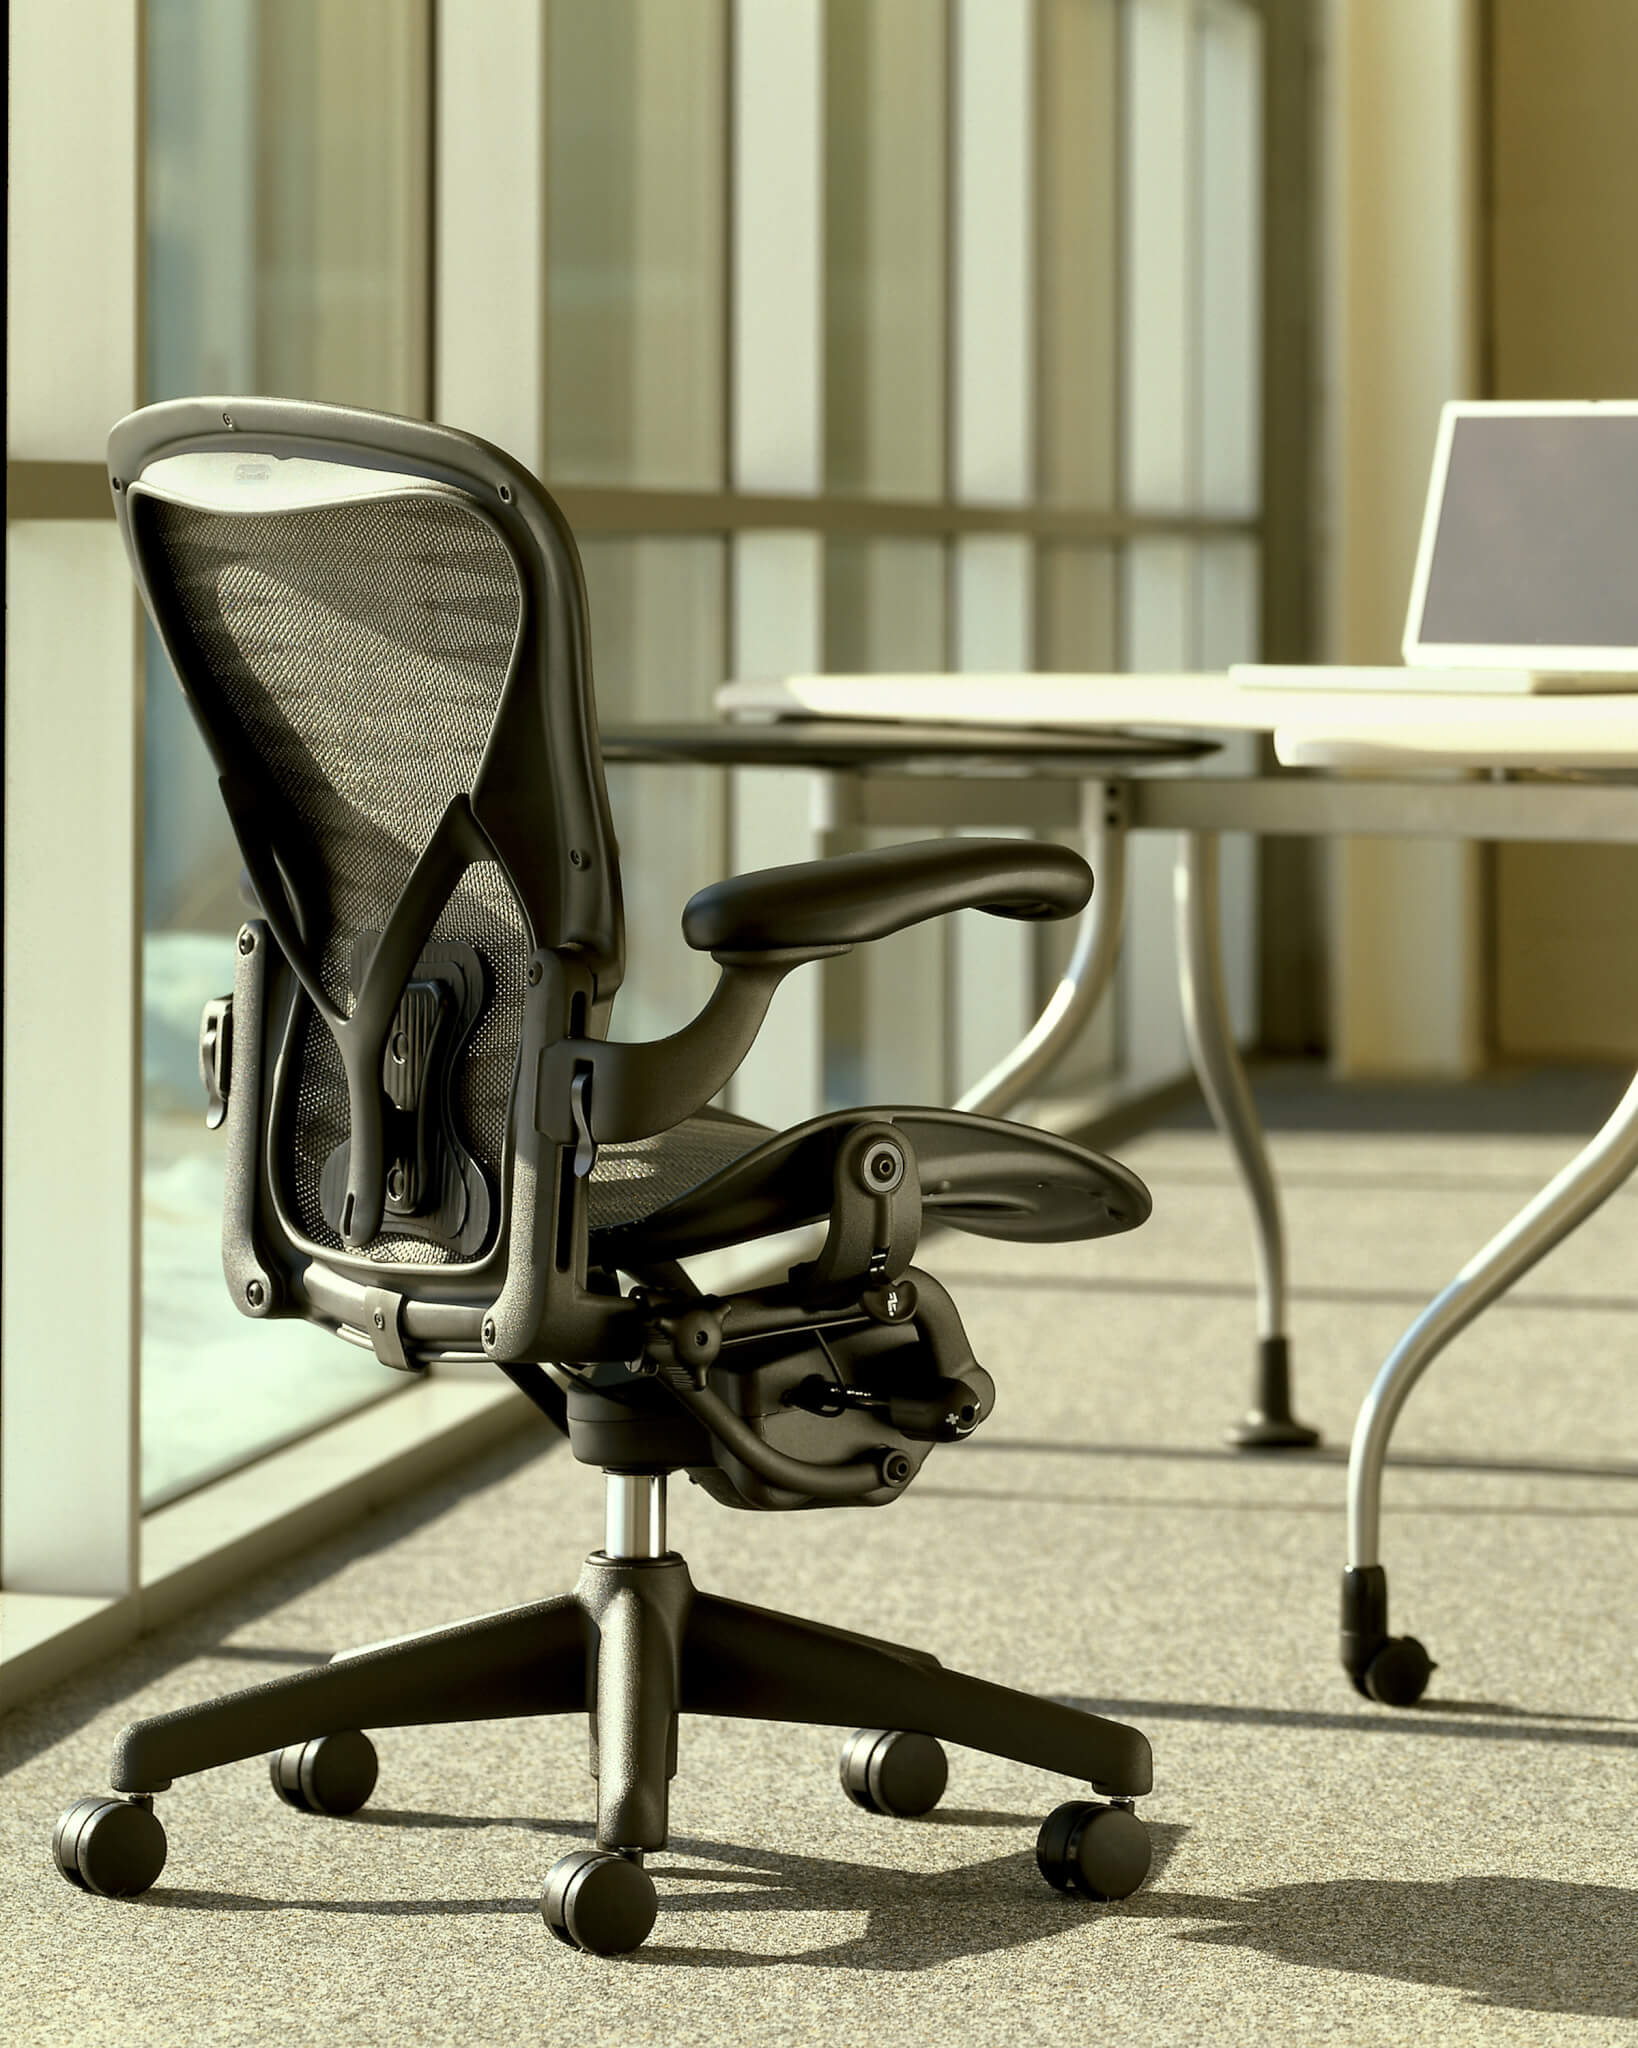 Picking The Right Aeron Chair For Your Needs Ergonomic Chair Central